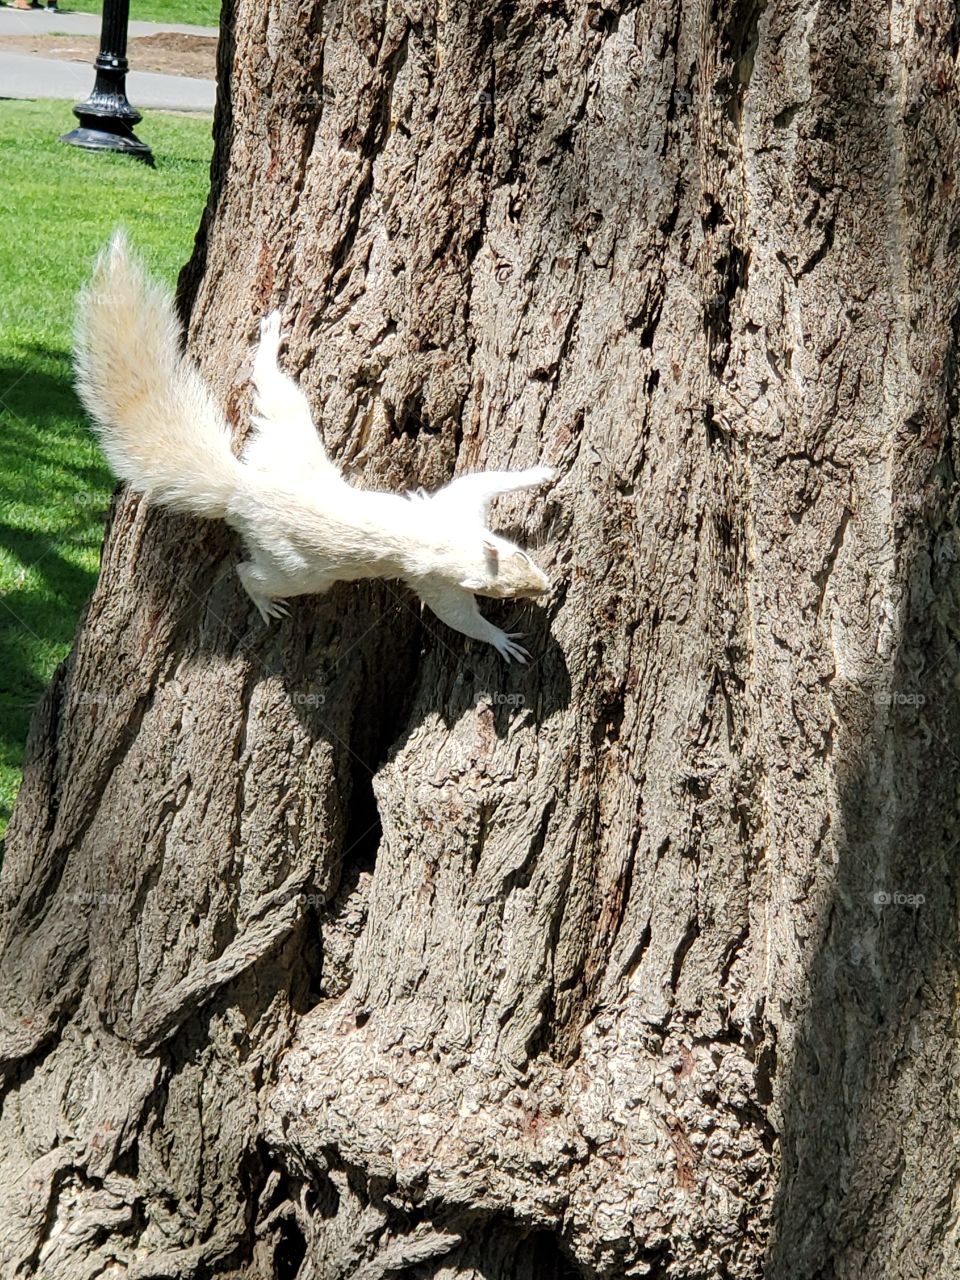 Albino Squirrel hanging out in Boston Public Park. Amazing creation made so much like it's colored comrades, though uniquely beautiful.